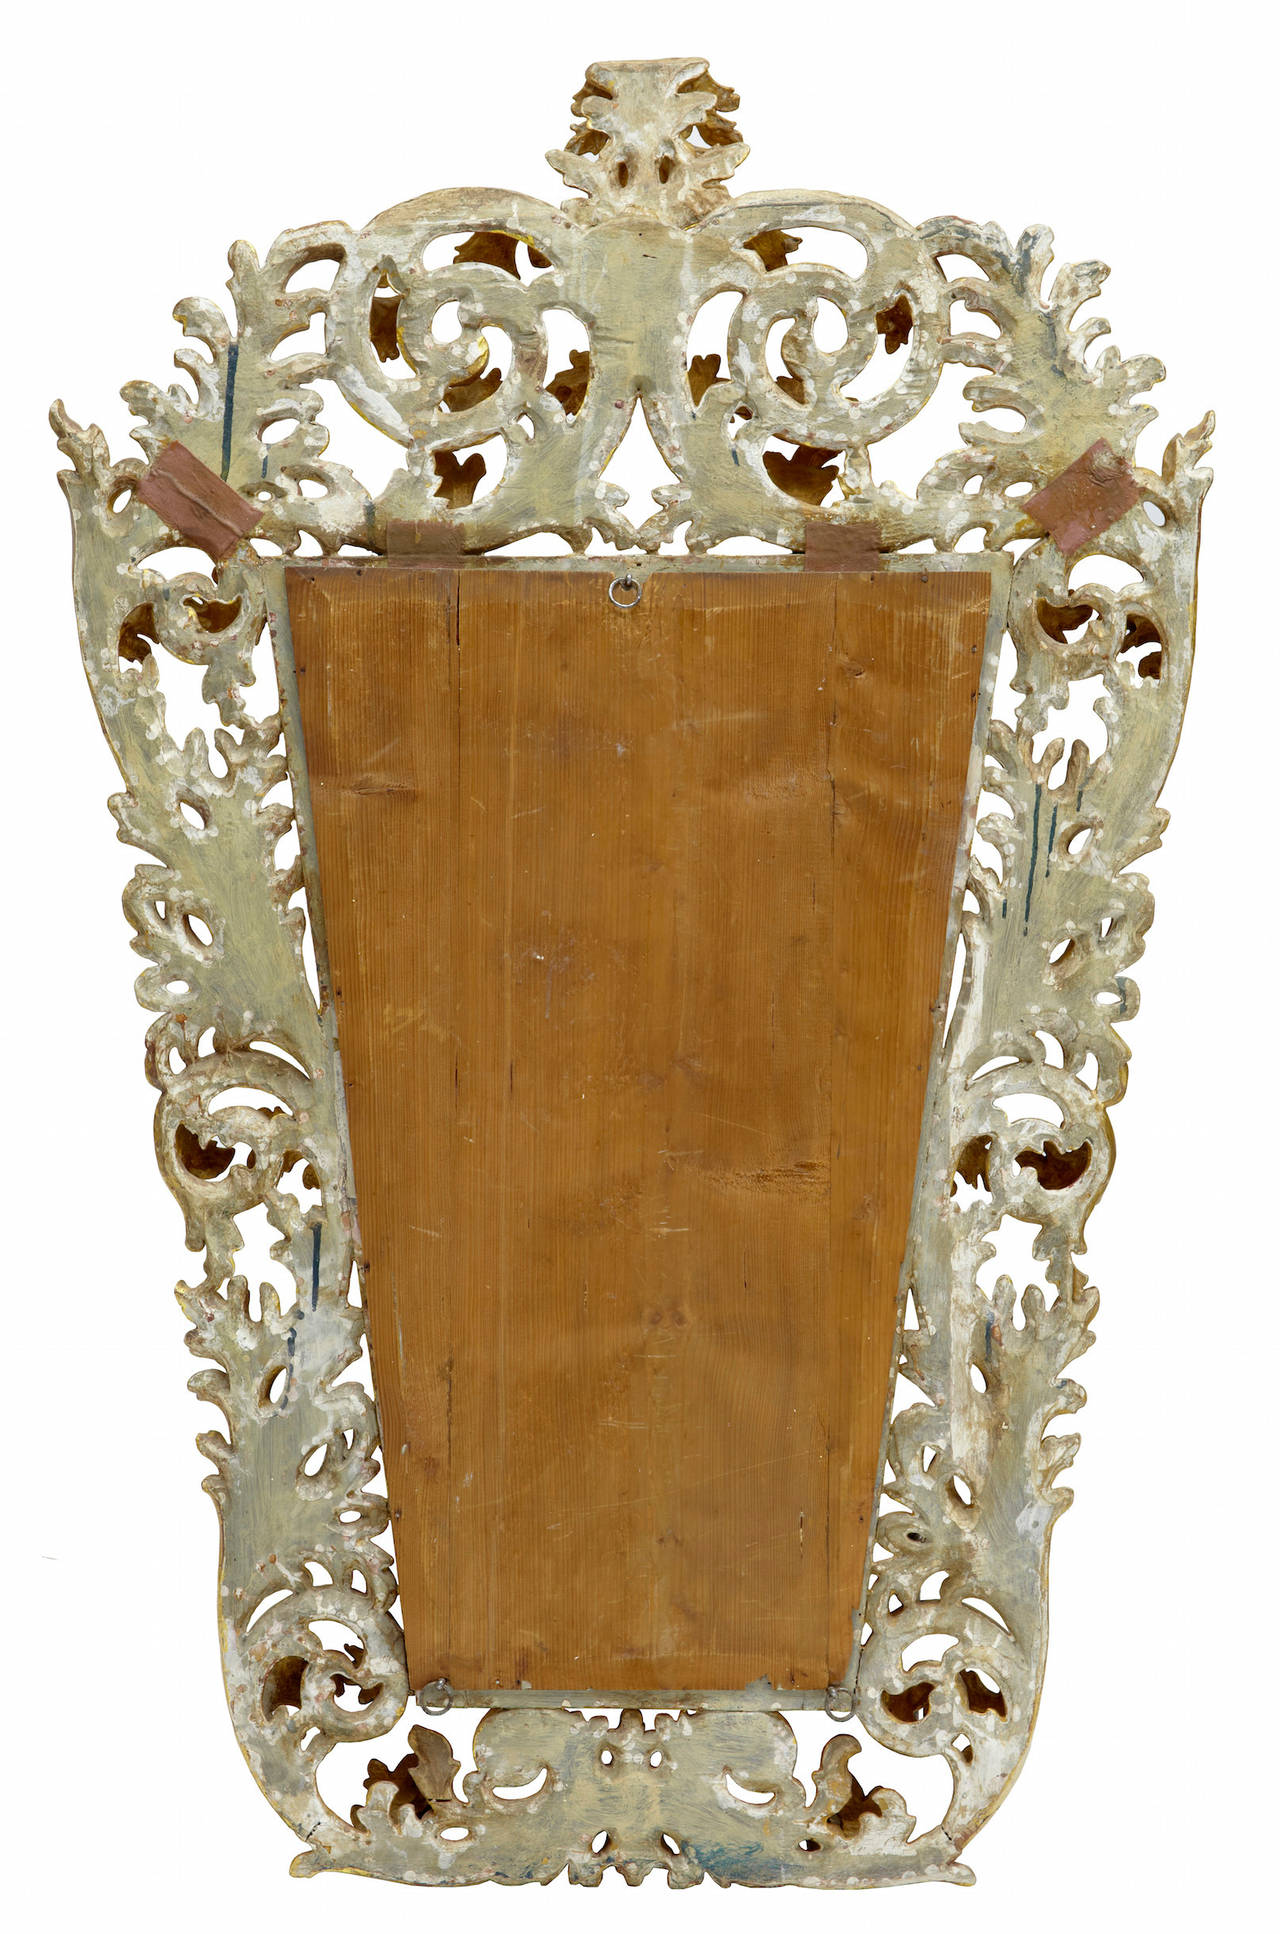 18th century carved Italian giltwood mirror

Superb top quality Italian mirror, circa 1730.

Tapering mirror is profusely surrounded by carved florals and swags, in excellent condition.

Later mirror plate.

Measures: Height: 55